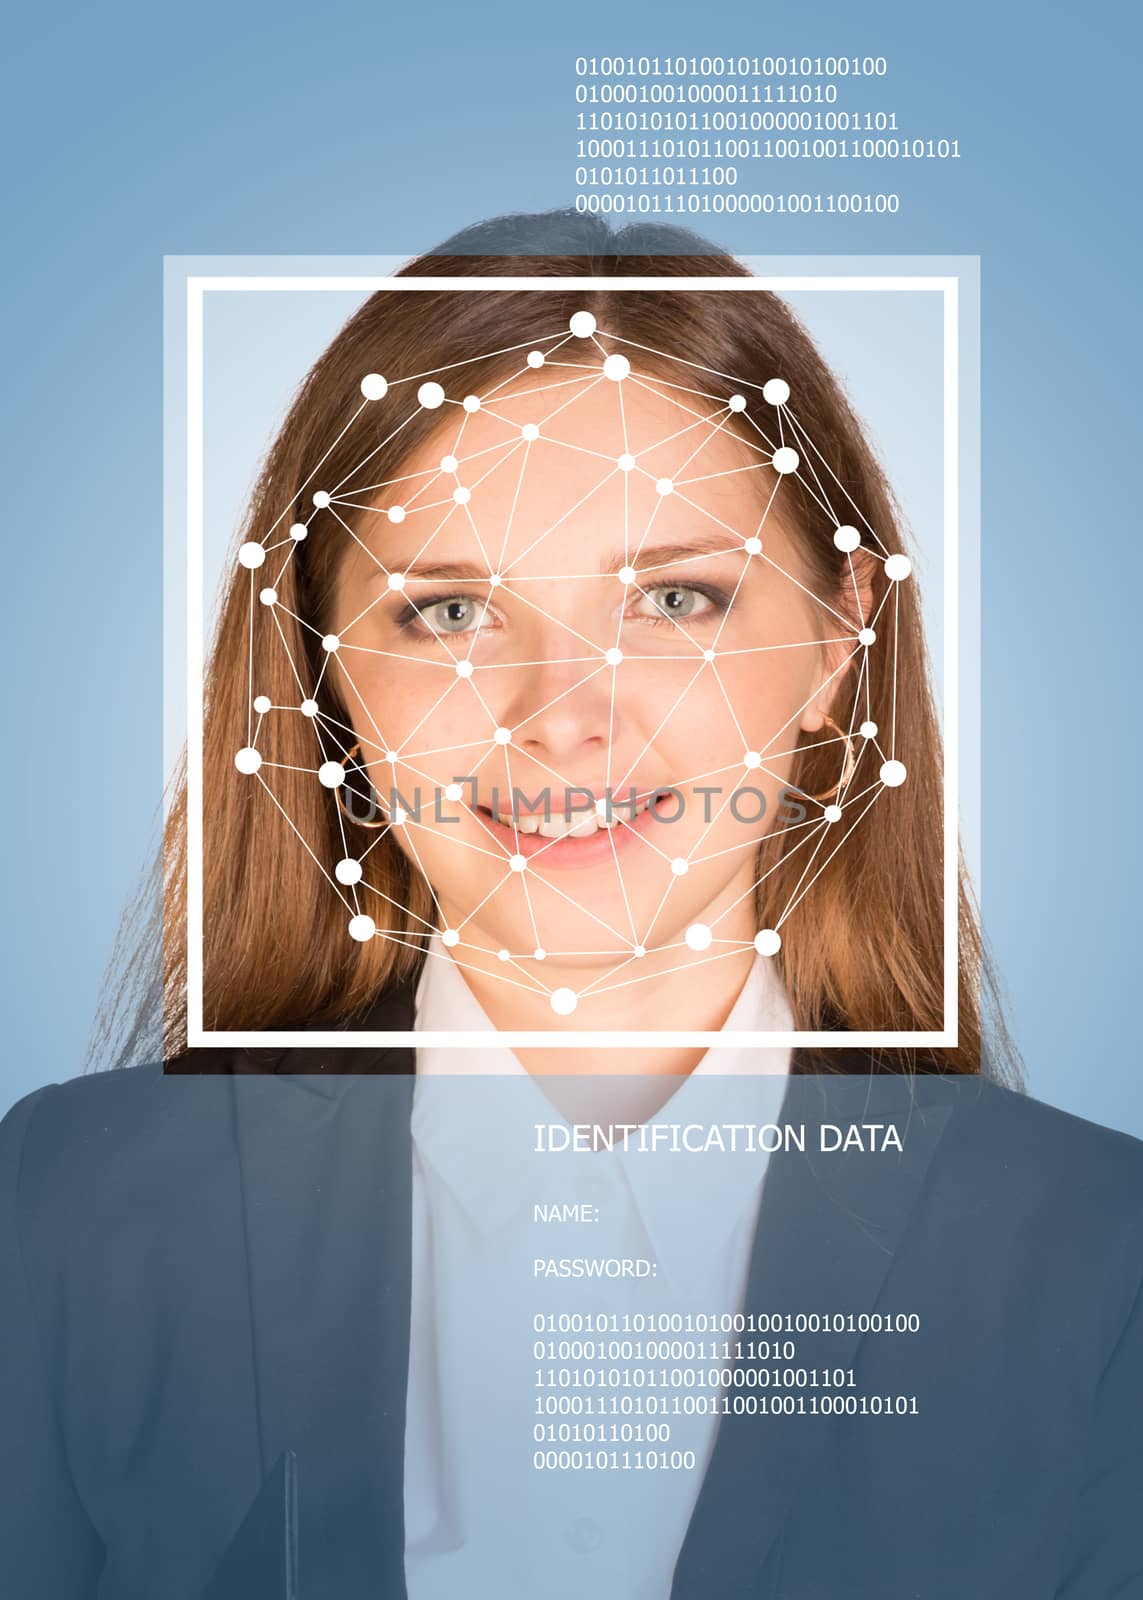 Concept of person identification. Girl face with lines, frame and text. Blue background